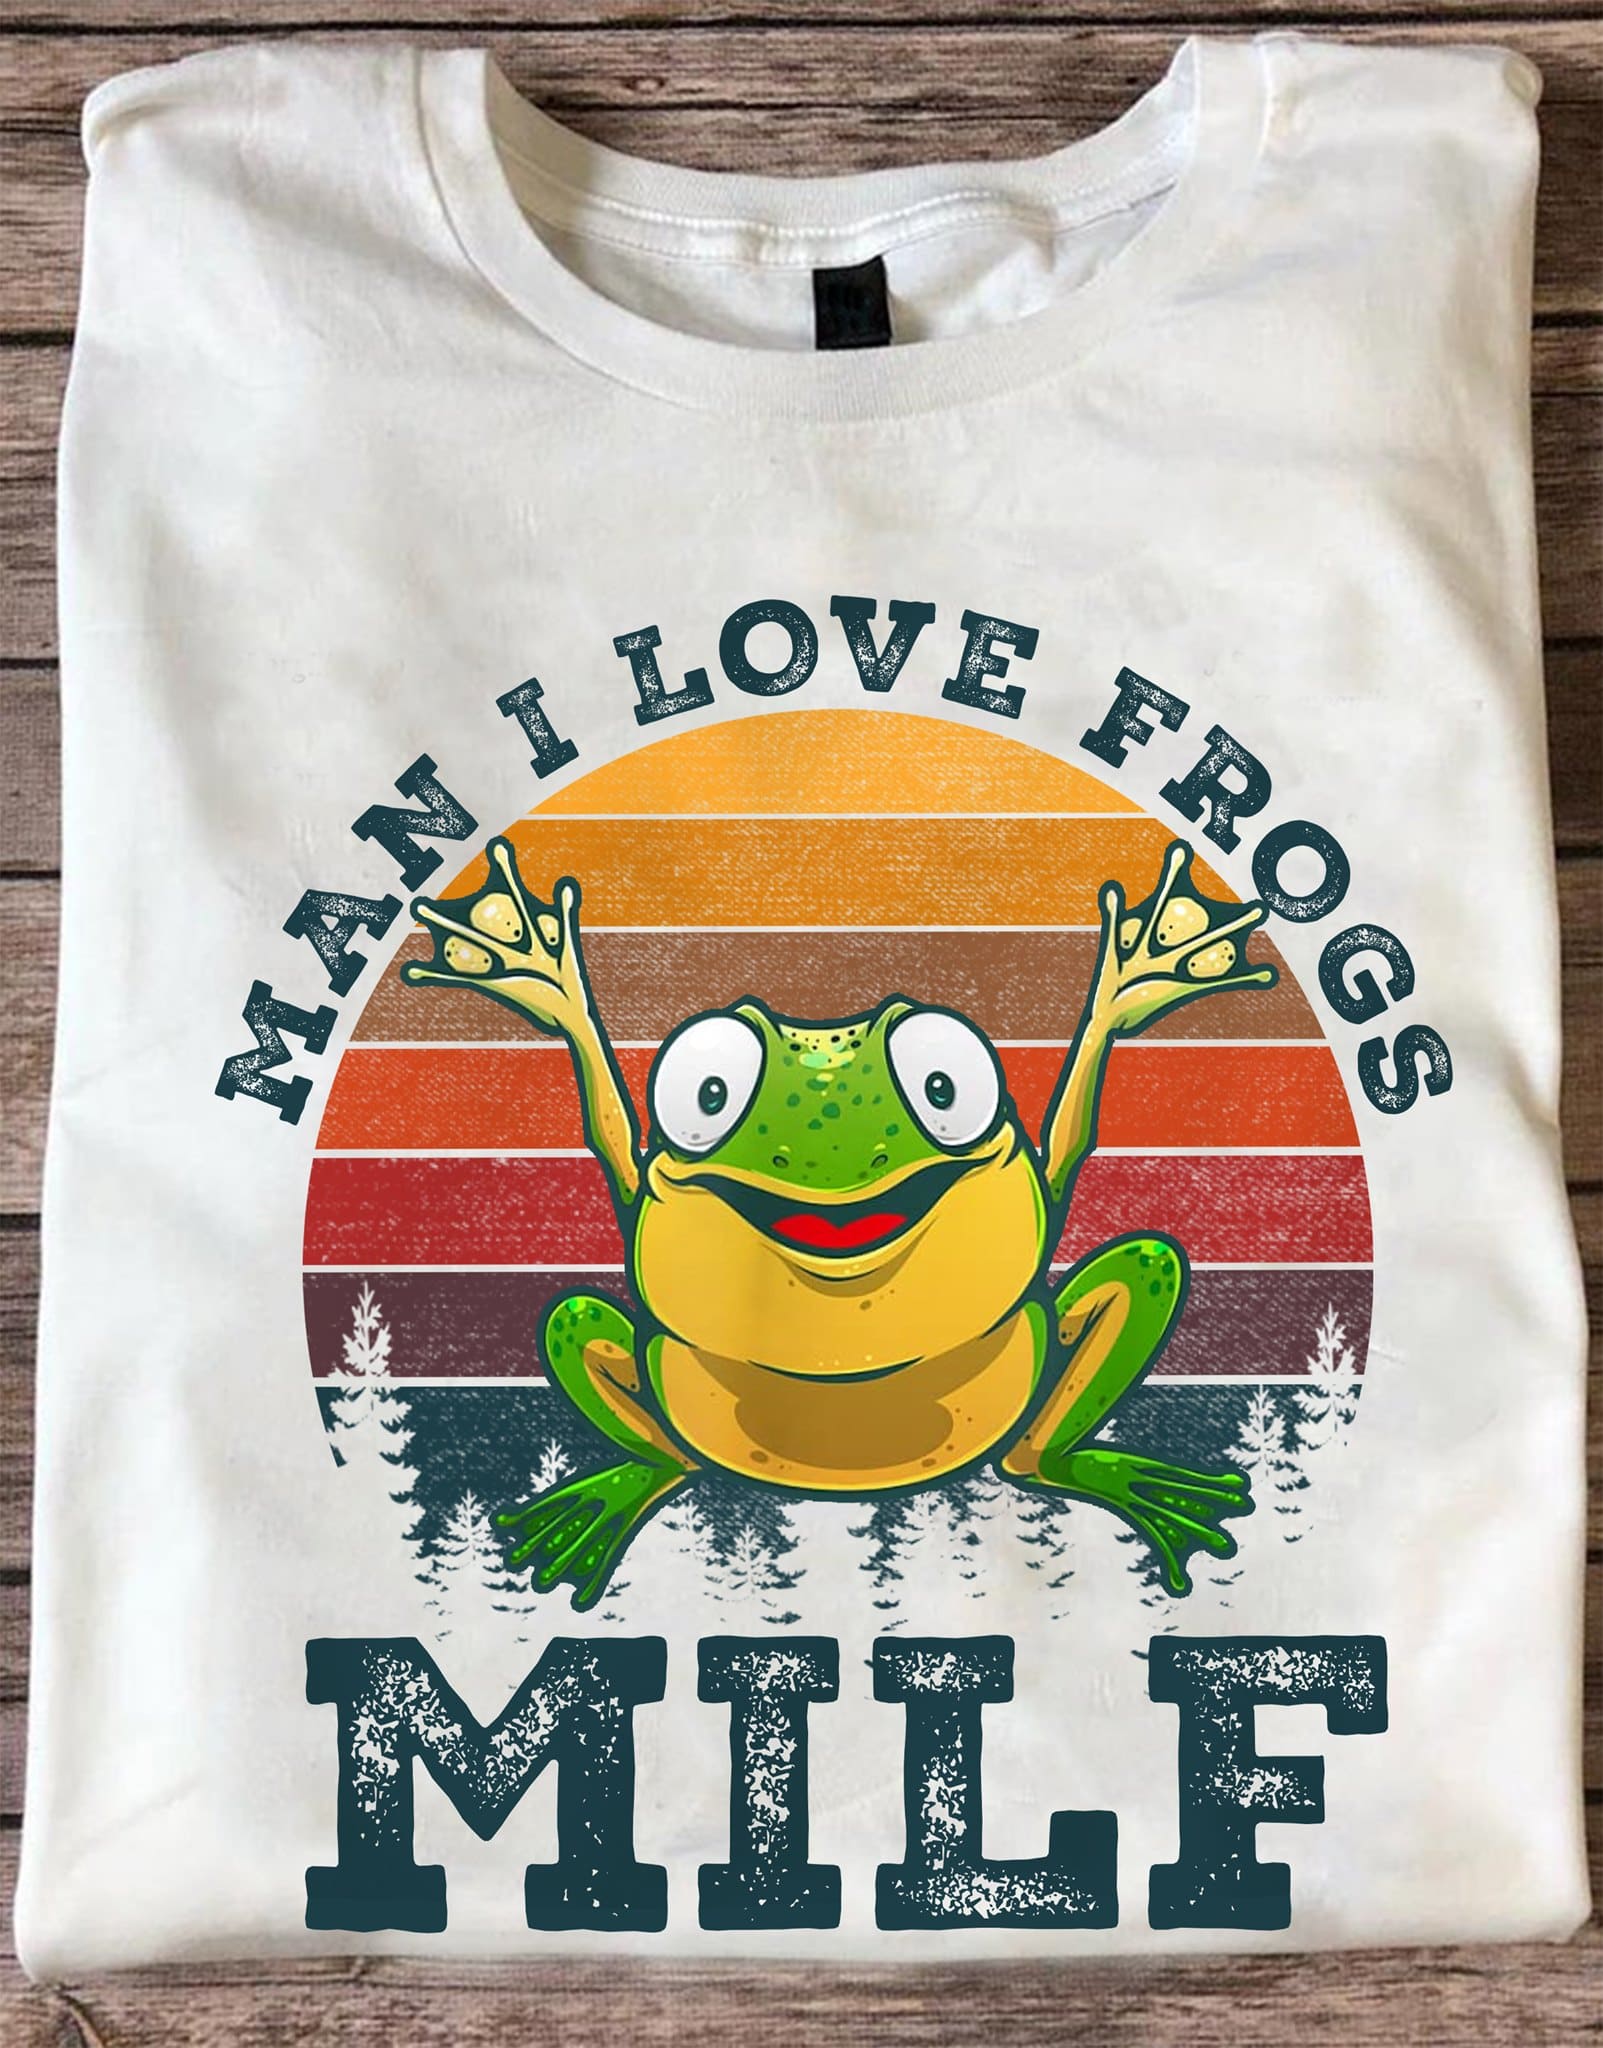 Funny Frog - Man i love frogs milf